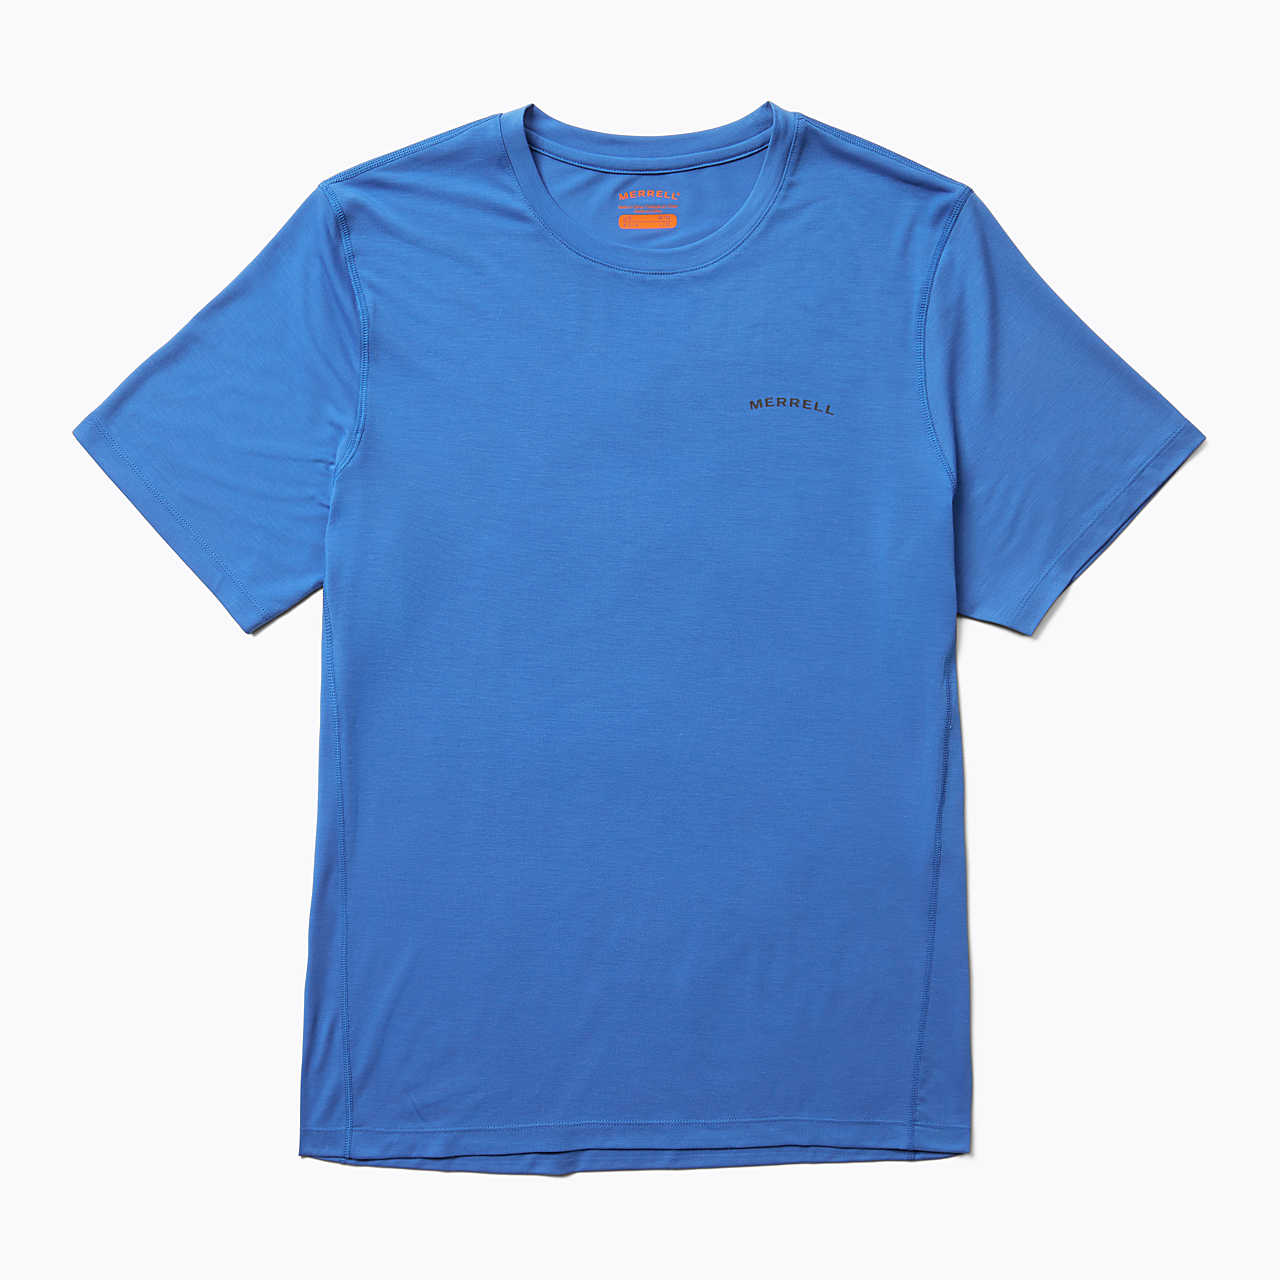 Quick Dry Shirts, Pants & Clothing for Men | Merrell